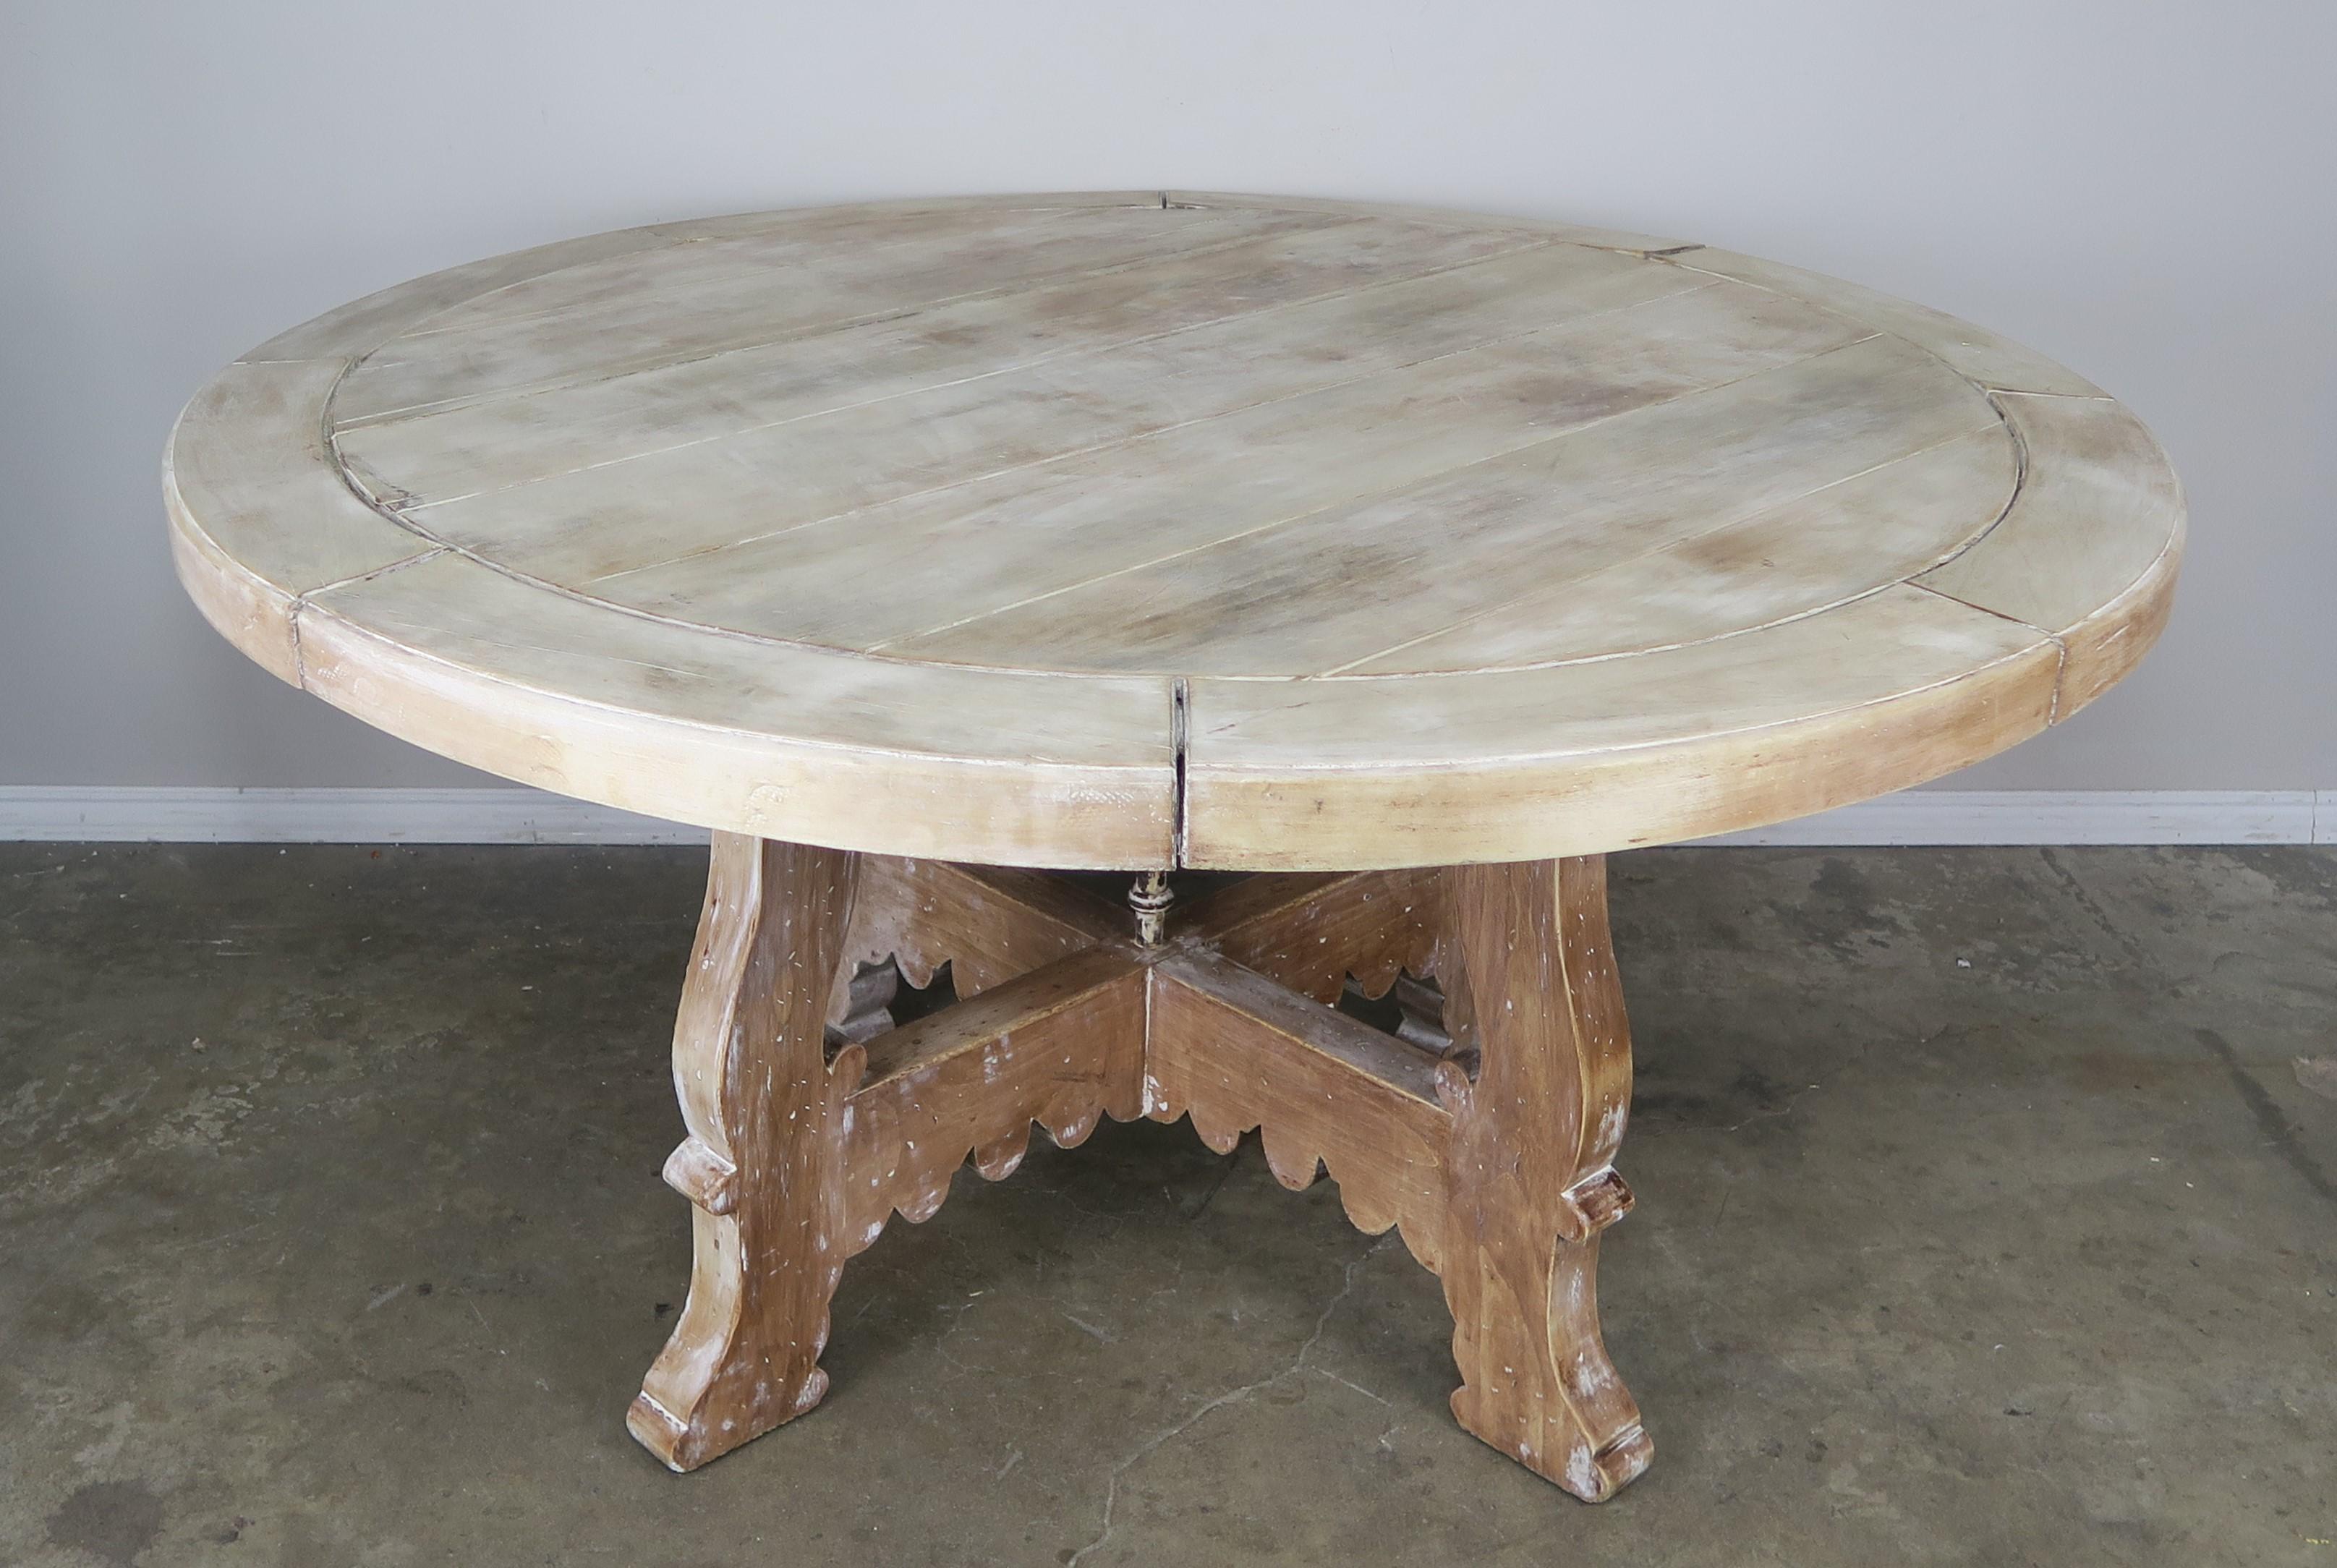 1930s Primitive style bleached walnut and iron round shaped dining table with beautiful white washed finish.
2.5 inch thick top and iron.